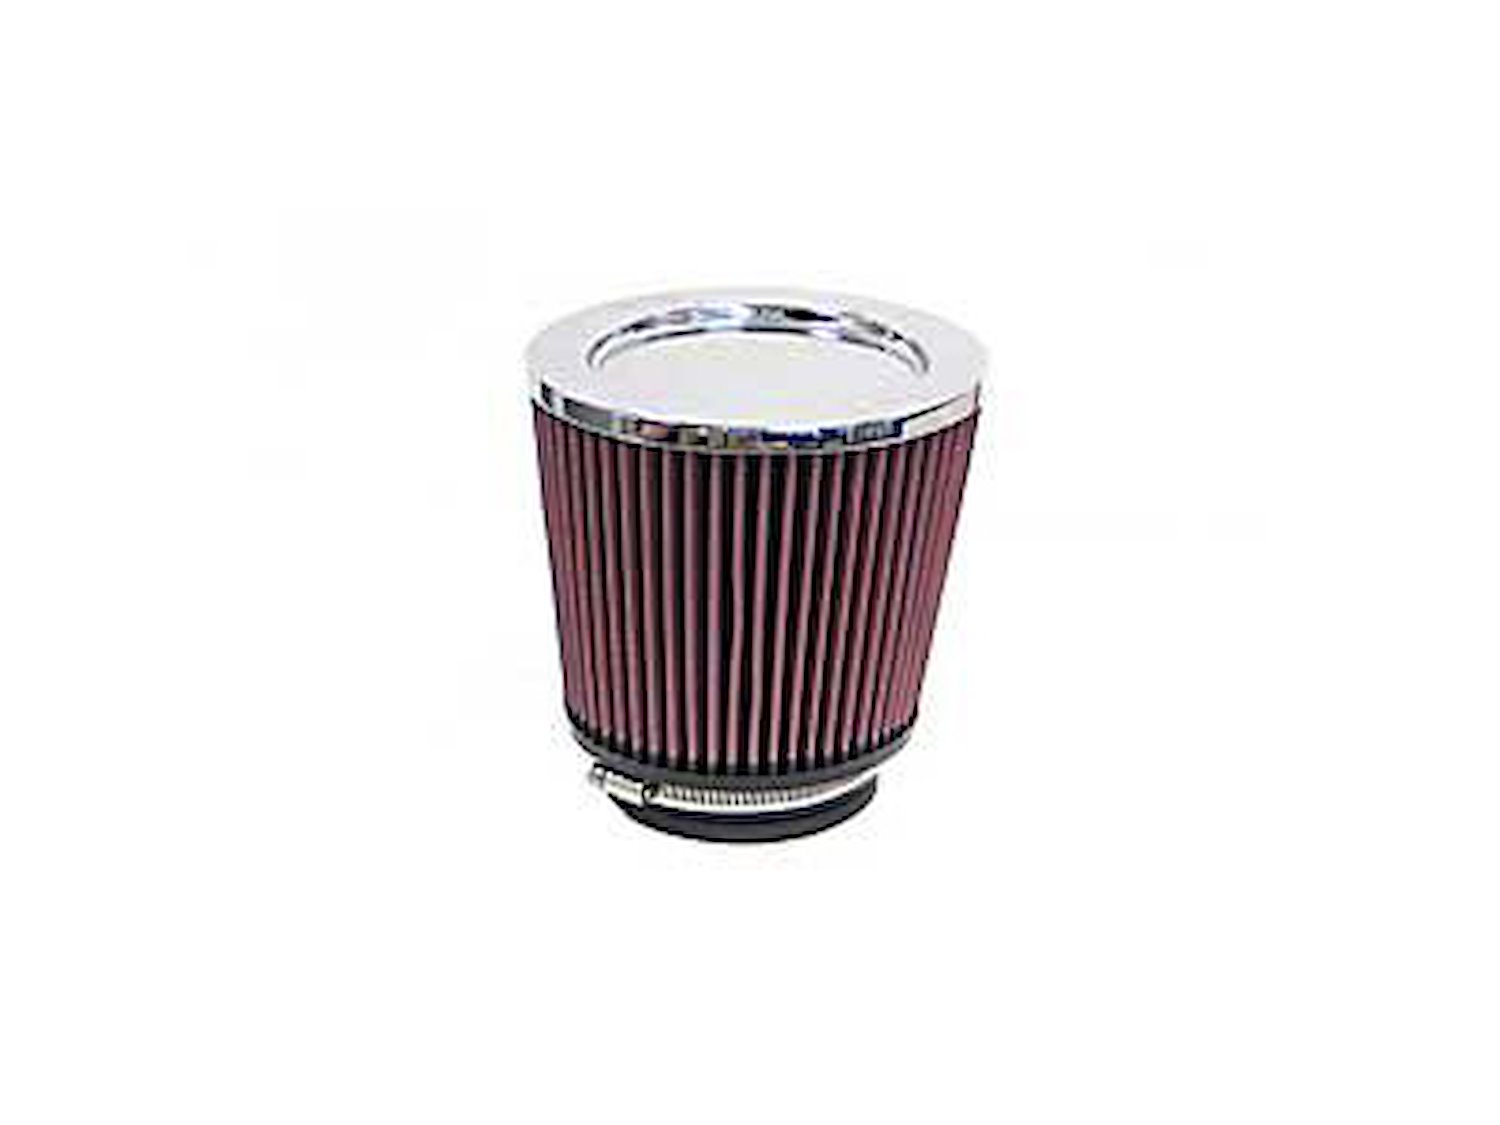 Round Straight Air Filter Flange Dia. (F): 2.5" (64 mm)